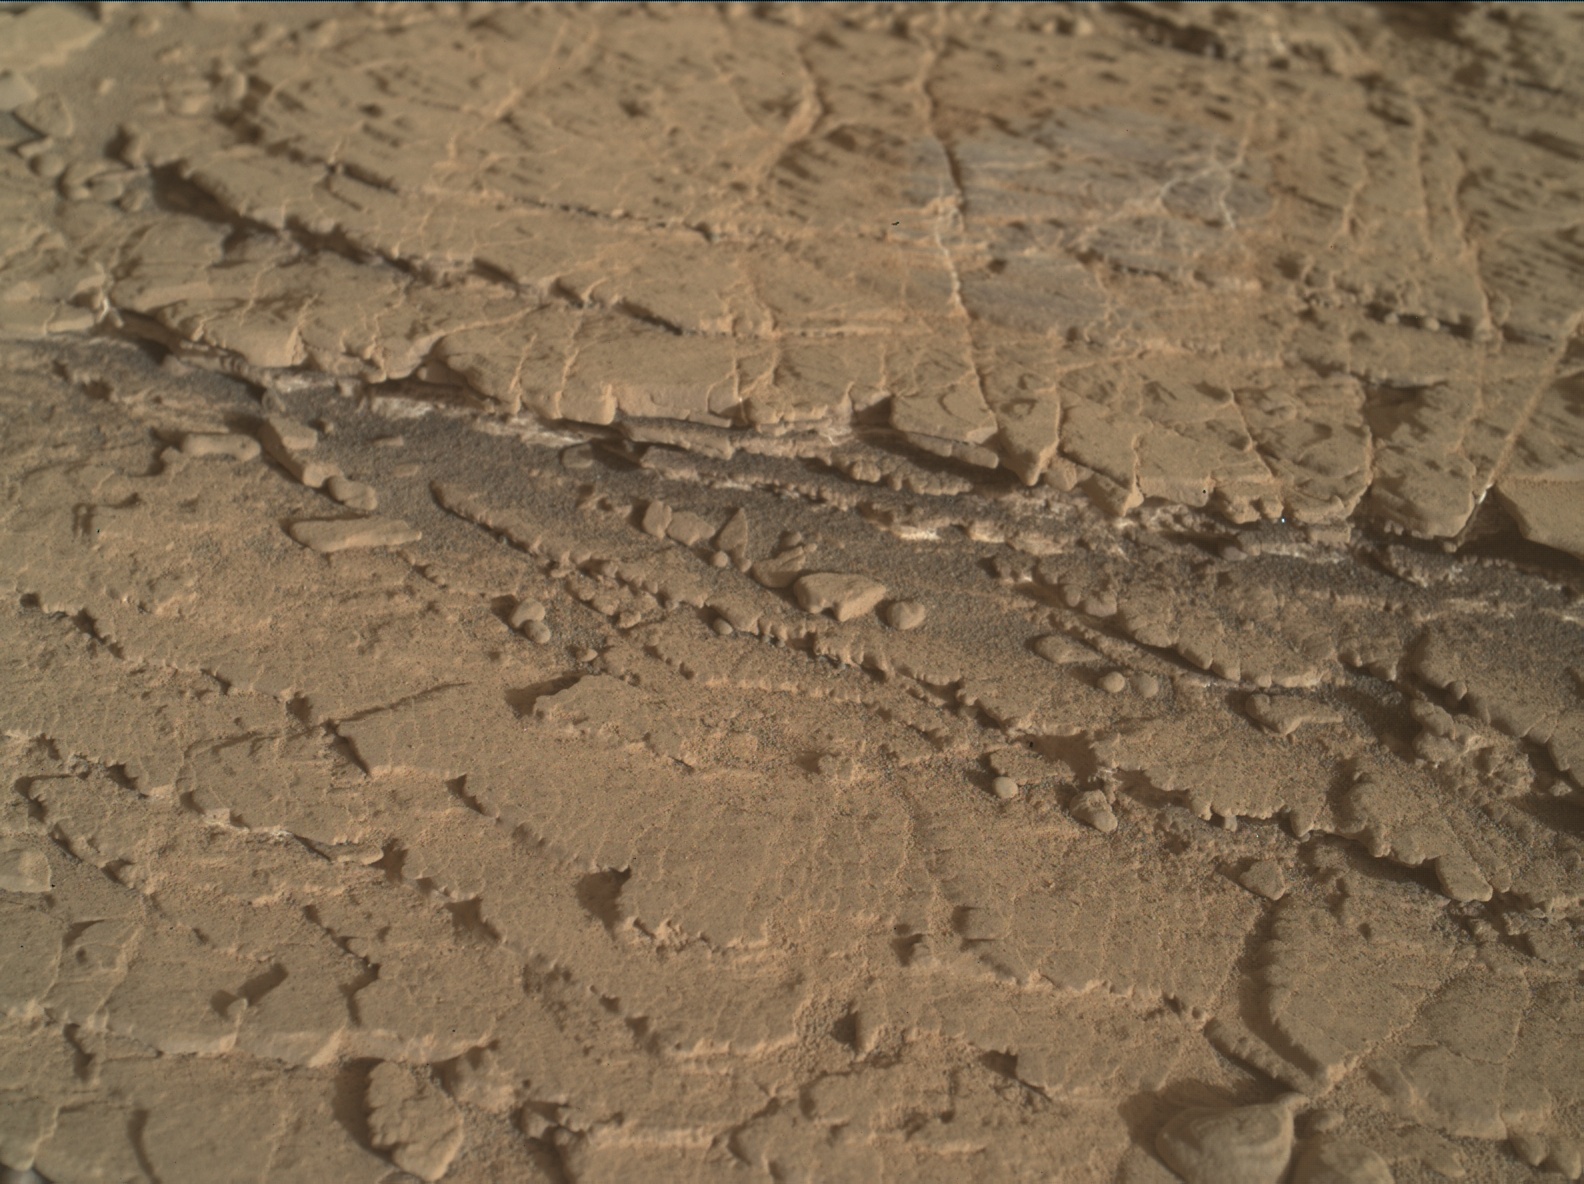 Nasa's Mars rover Curiosity acquired this image using its Mars Hand Lens Imager (MAHLI) on Sol 2483